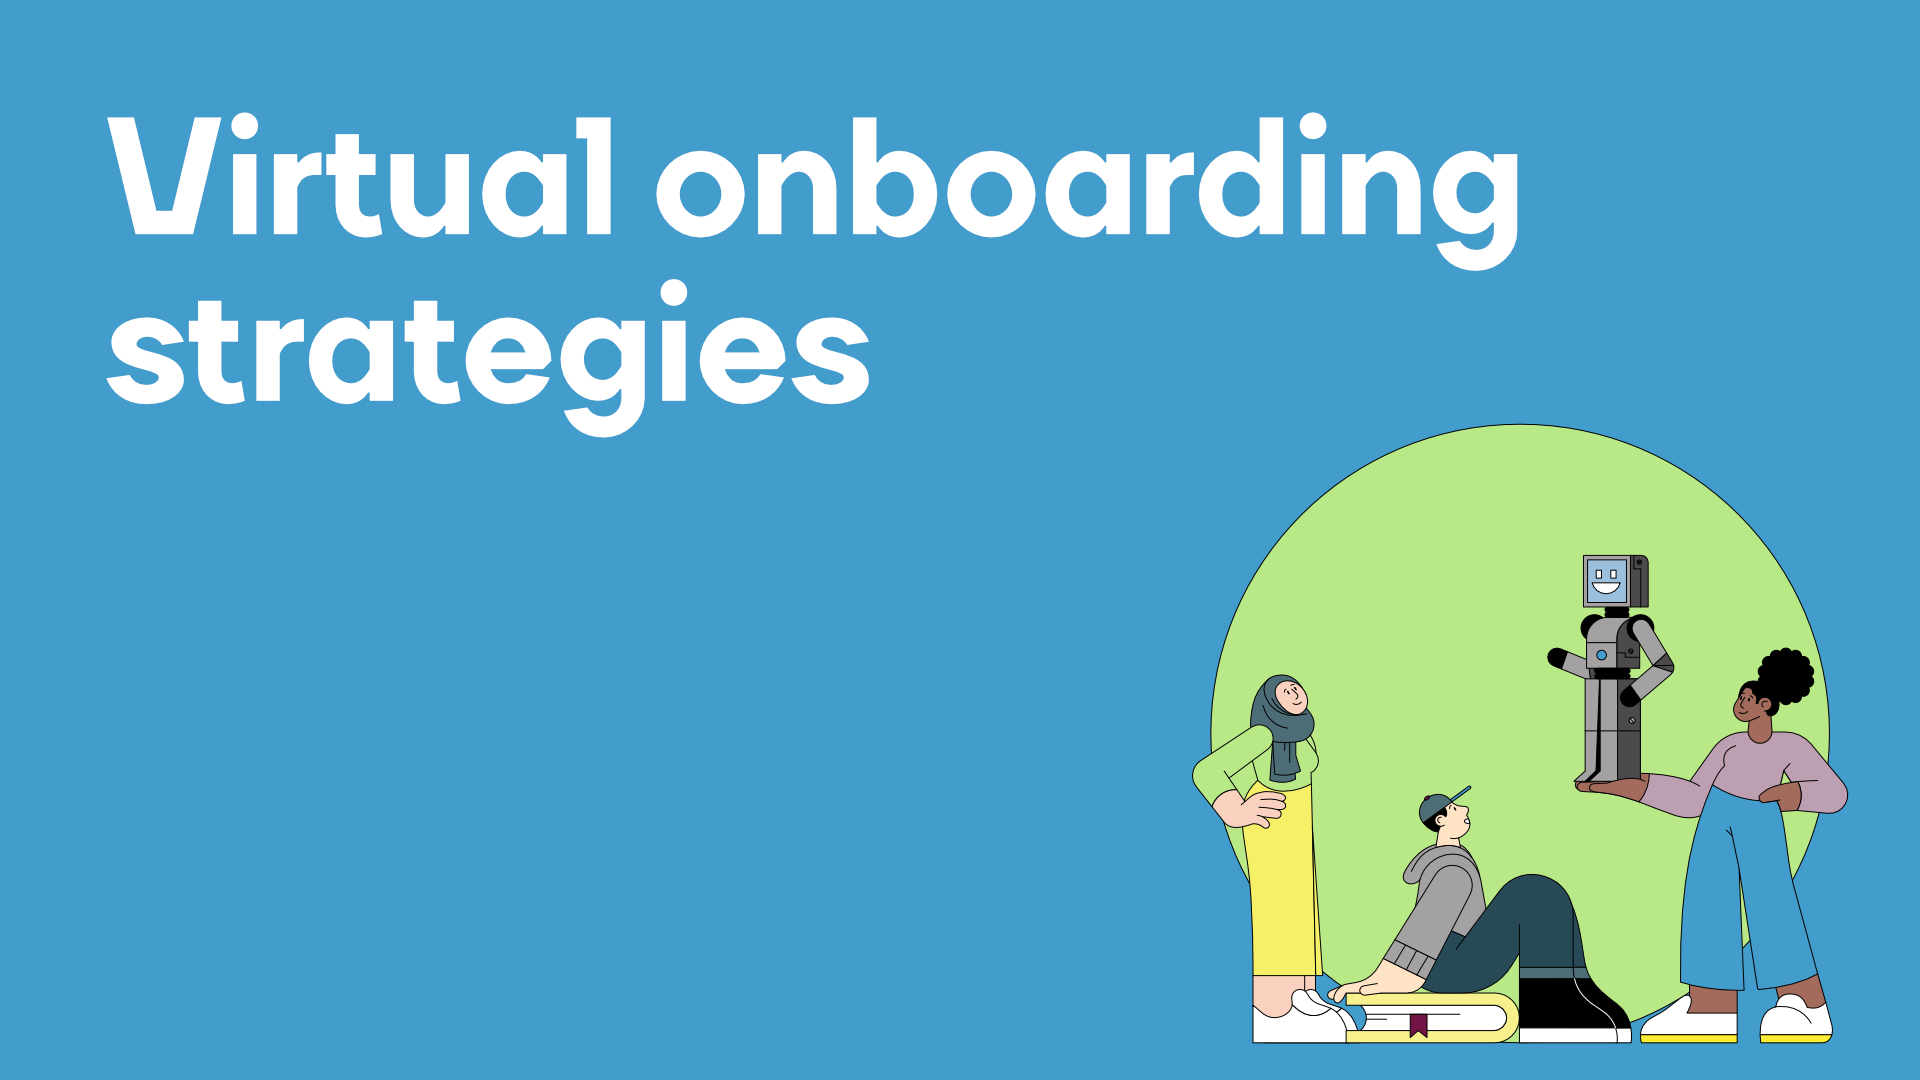 Virtual onboarding strategies and tips